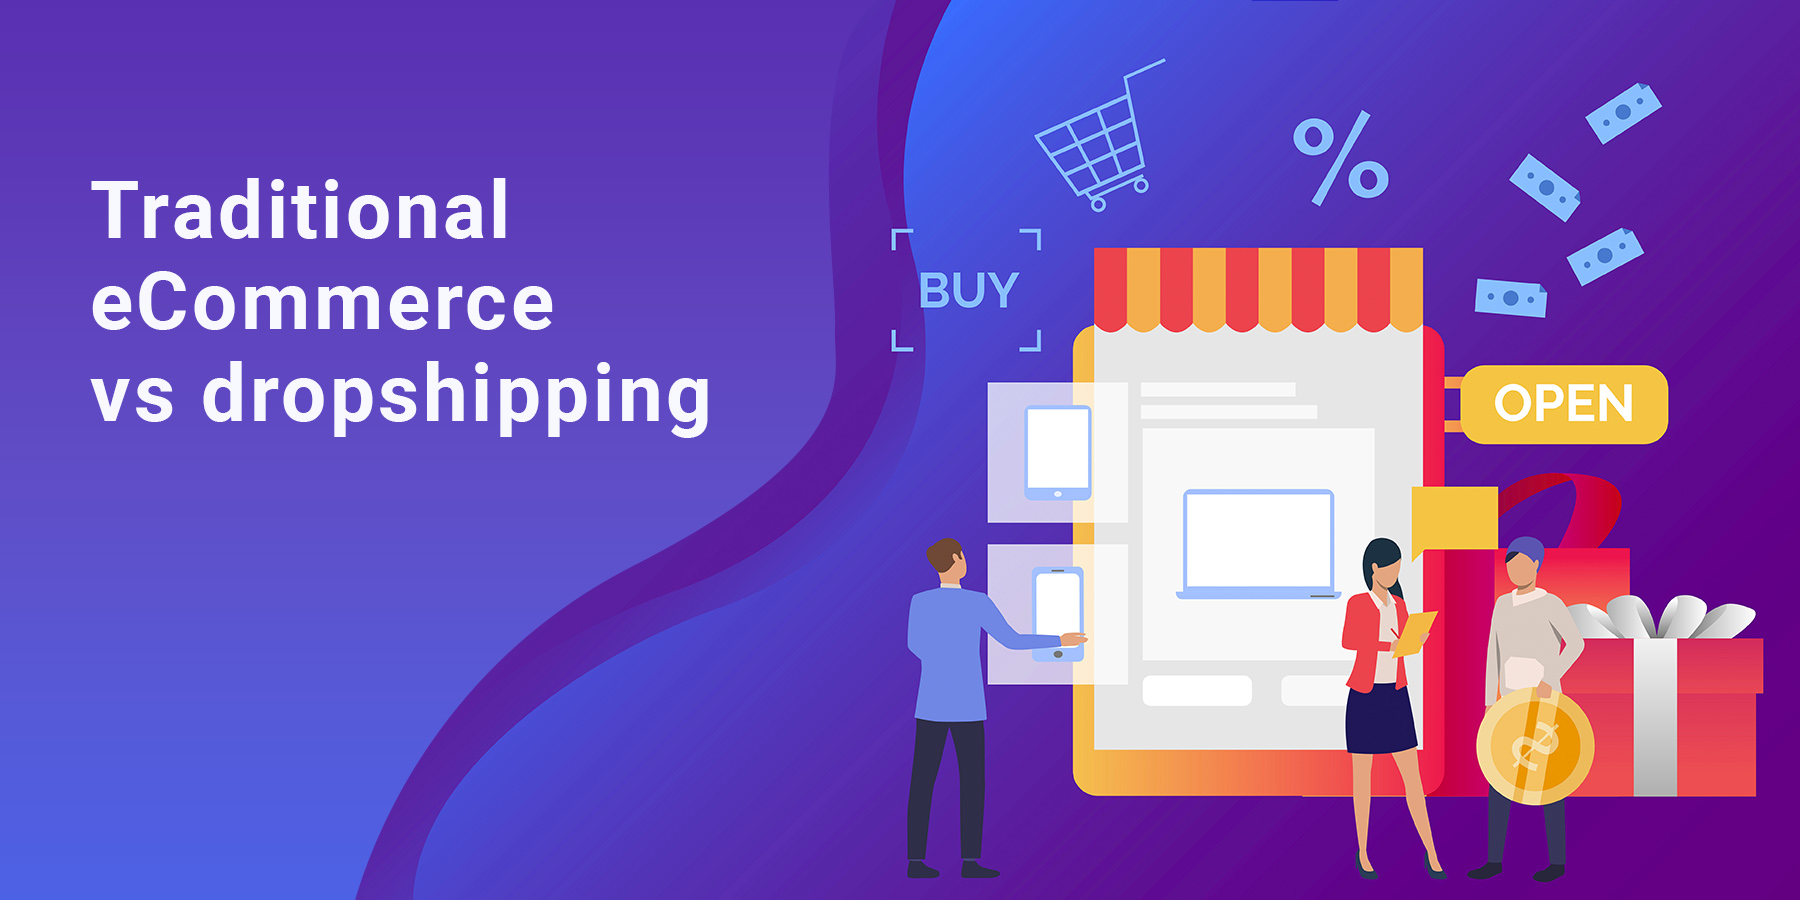 Traditional eCommerce vs dropshipping